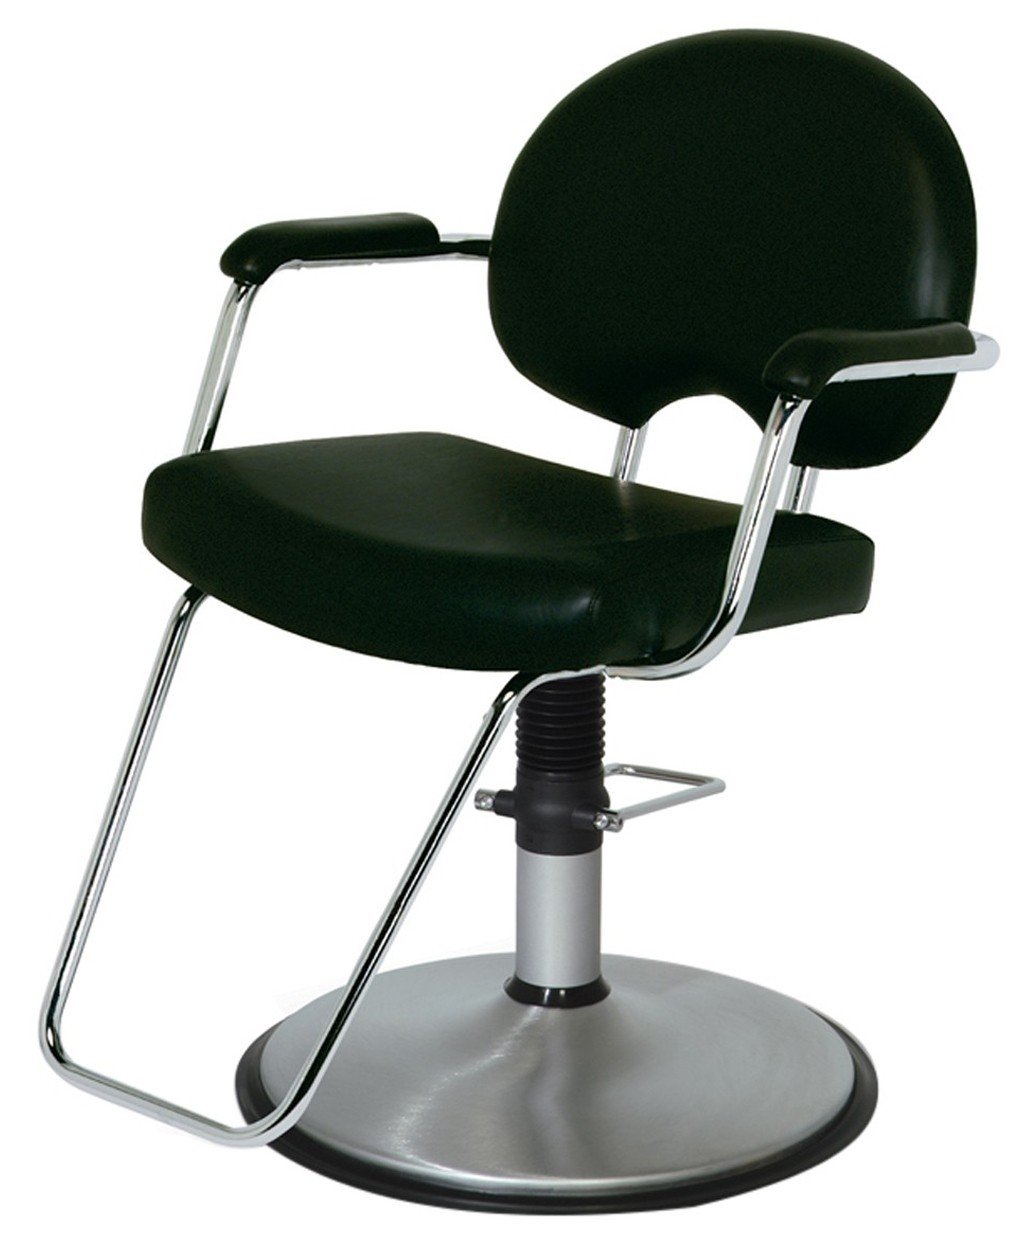 Belvedere AH22C Arch Plus Styling Chair